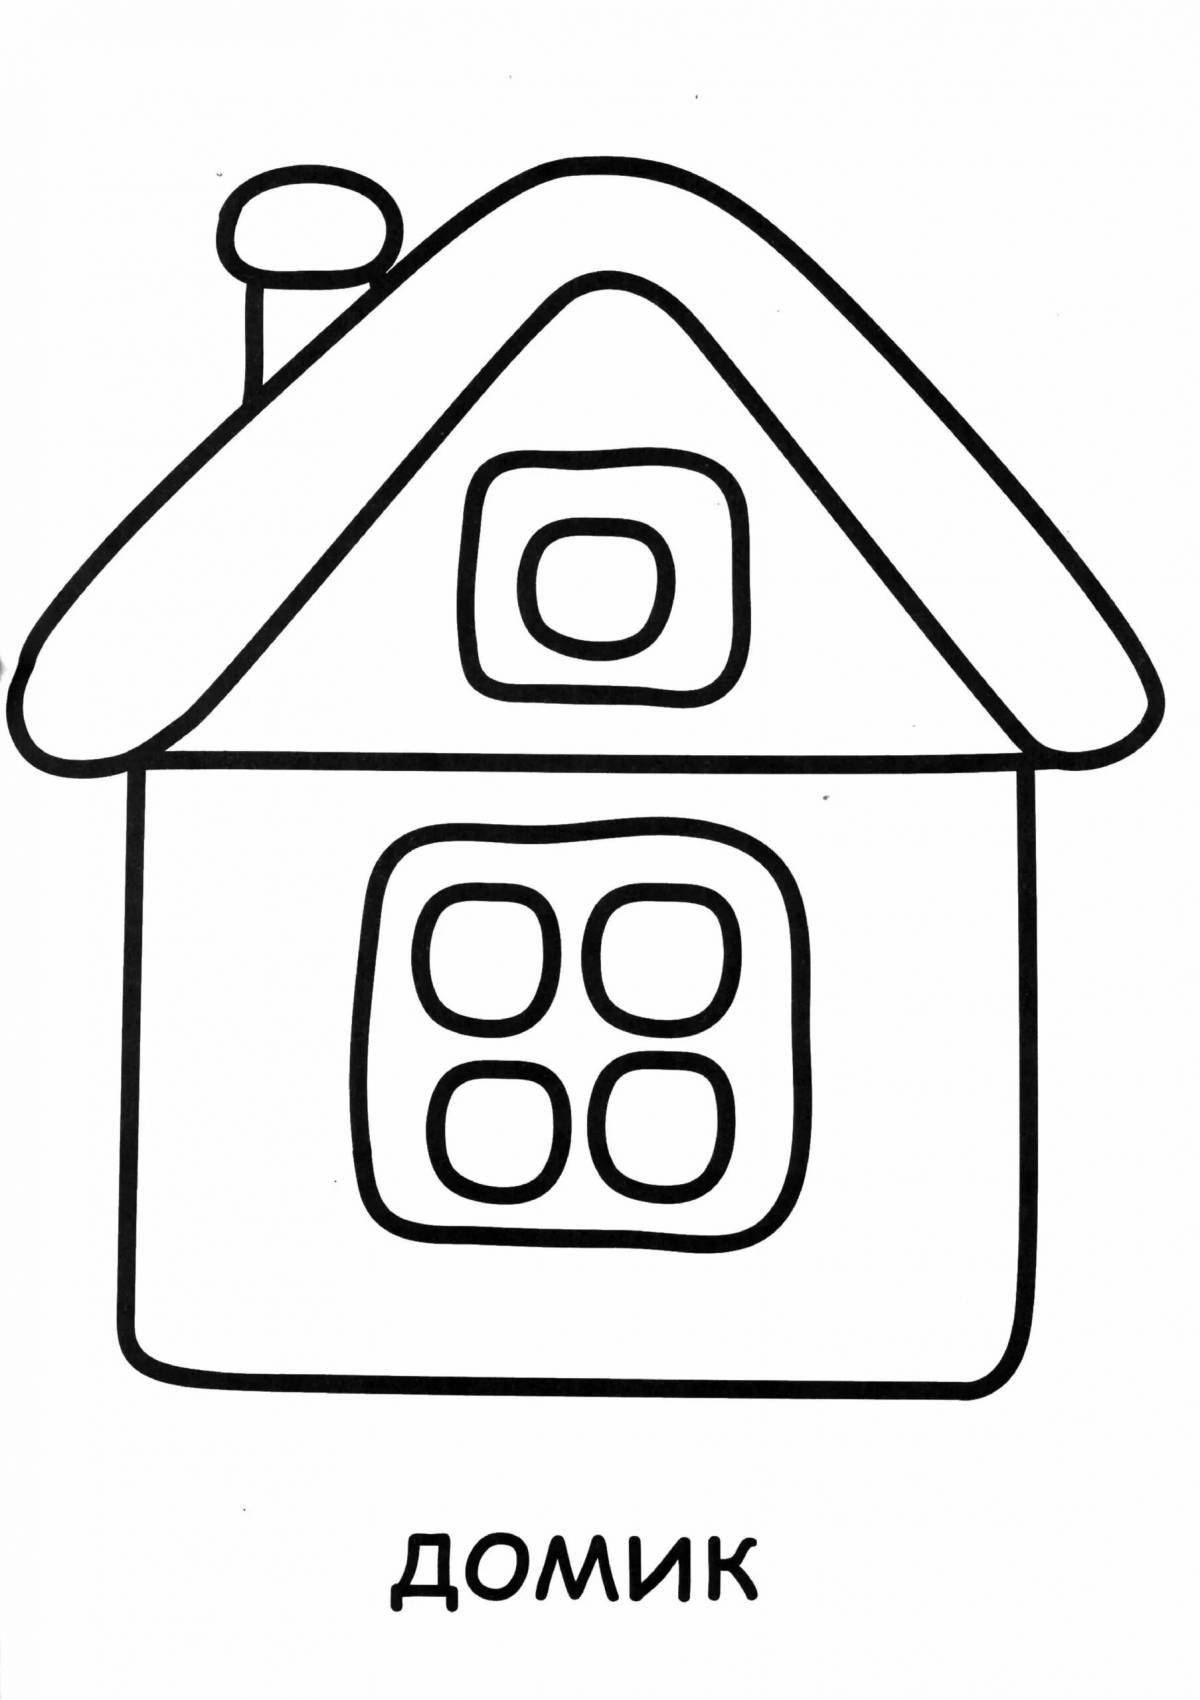 Fun simple house coloring page for kids